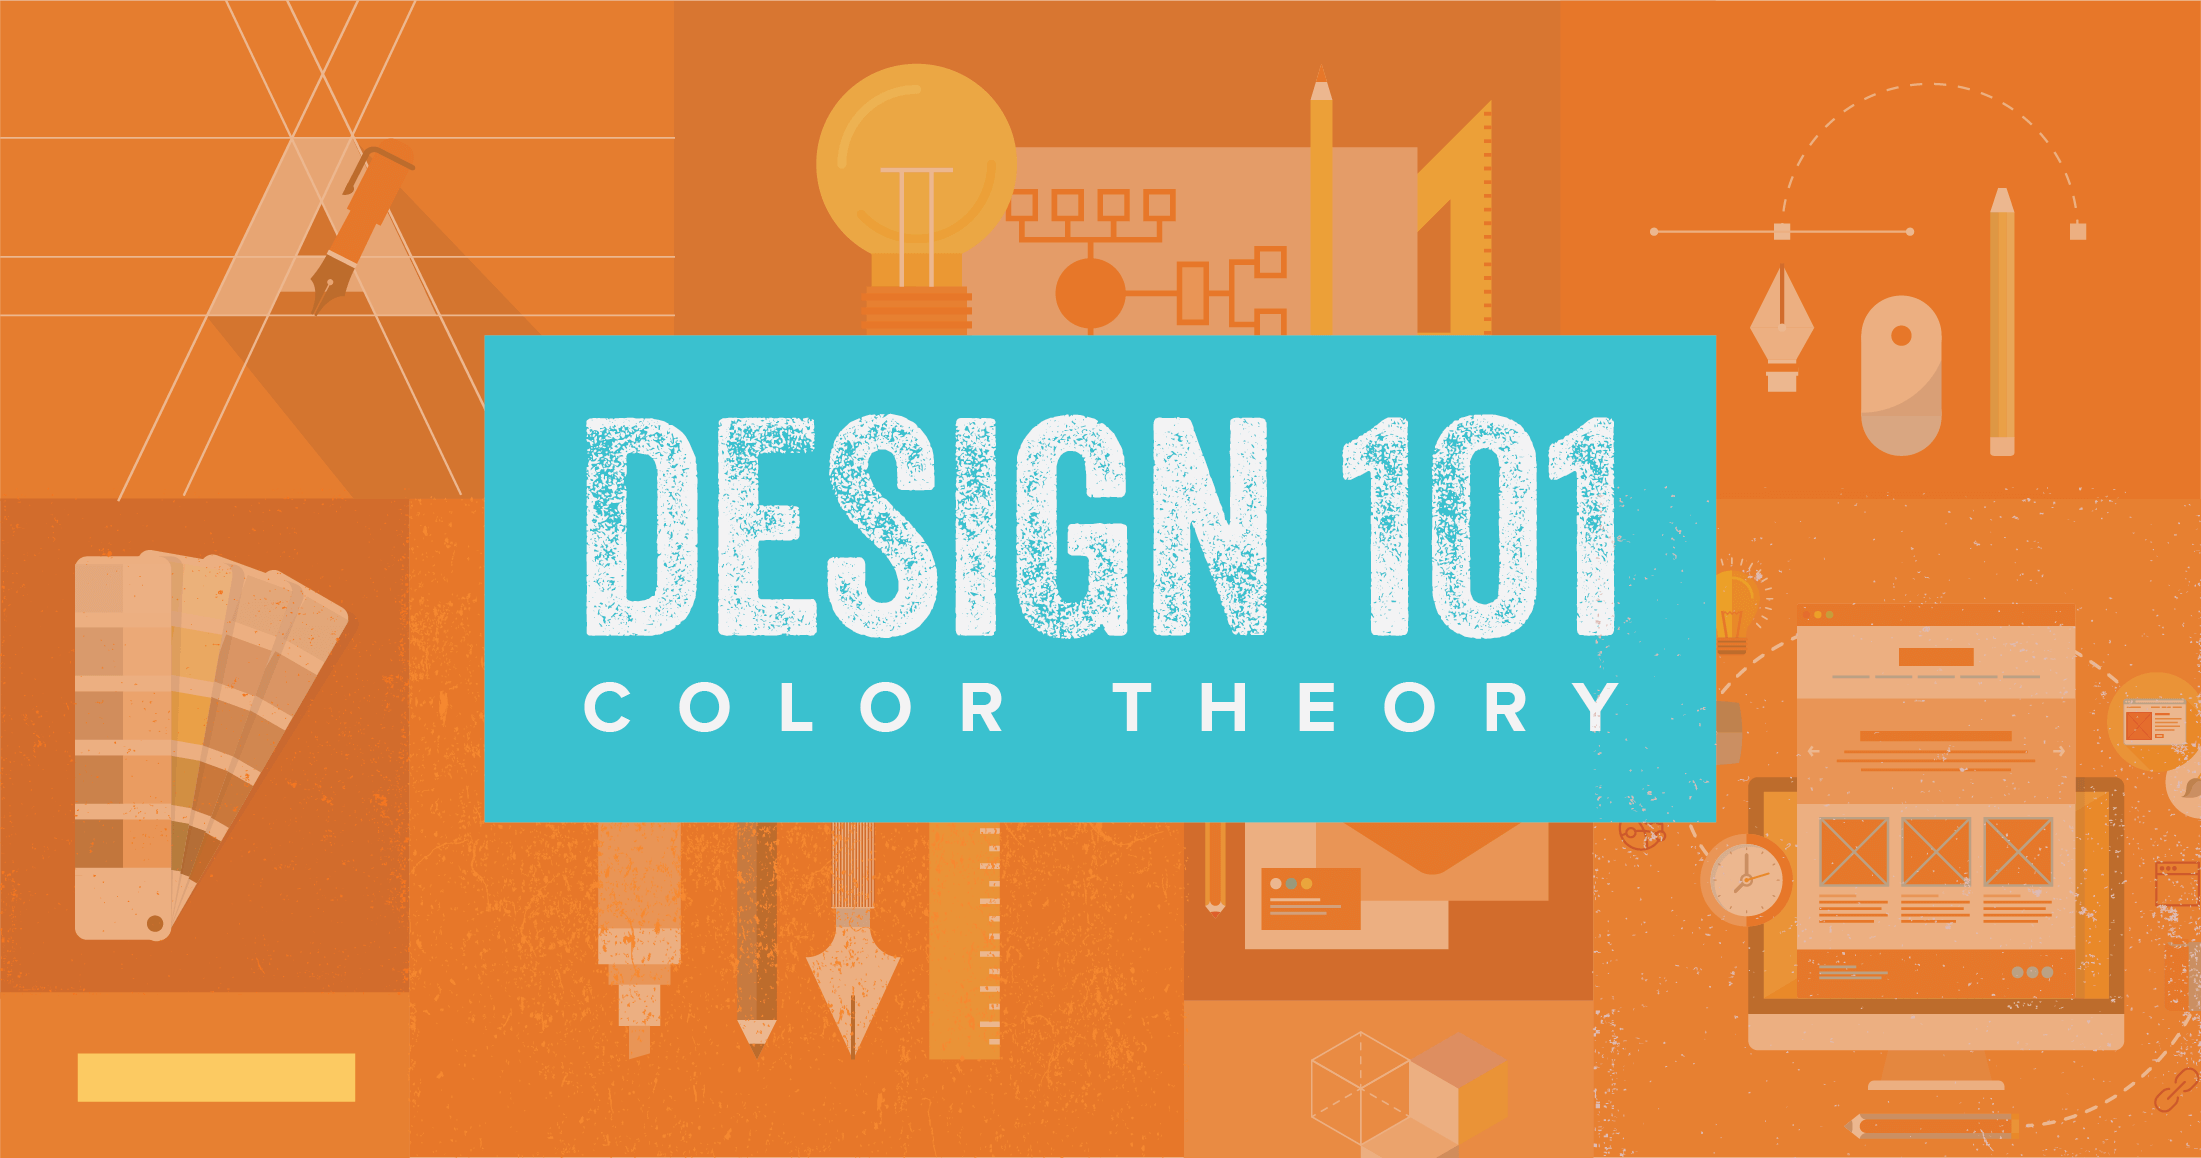 Blog Header Image for "Design 101: Color Theory"